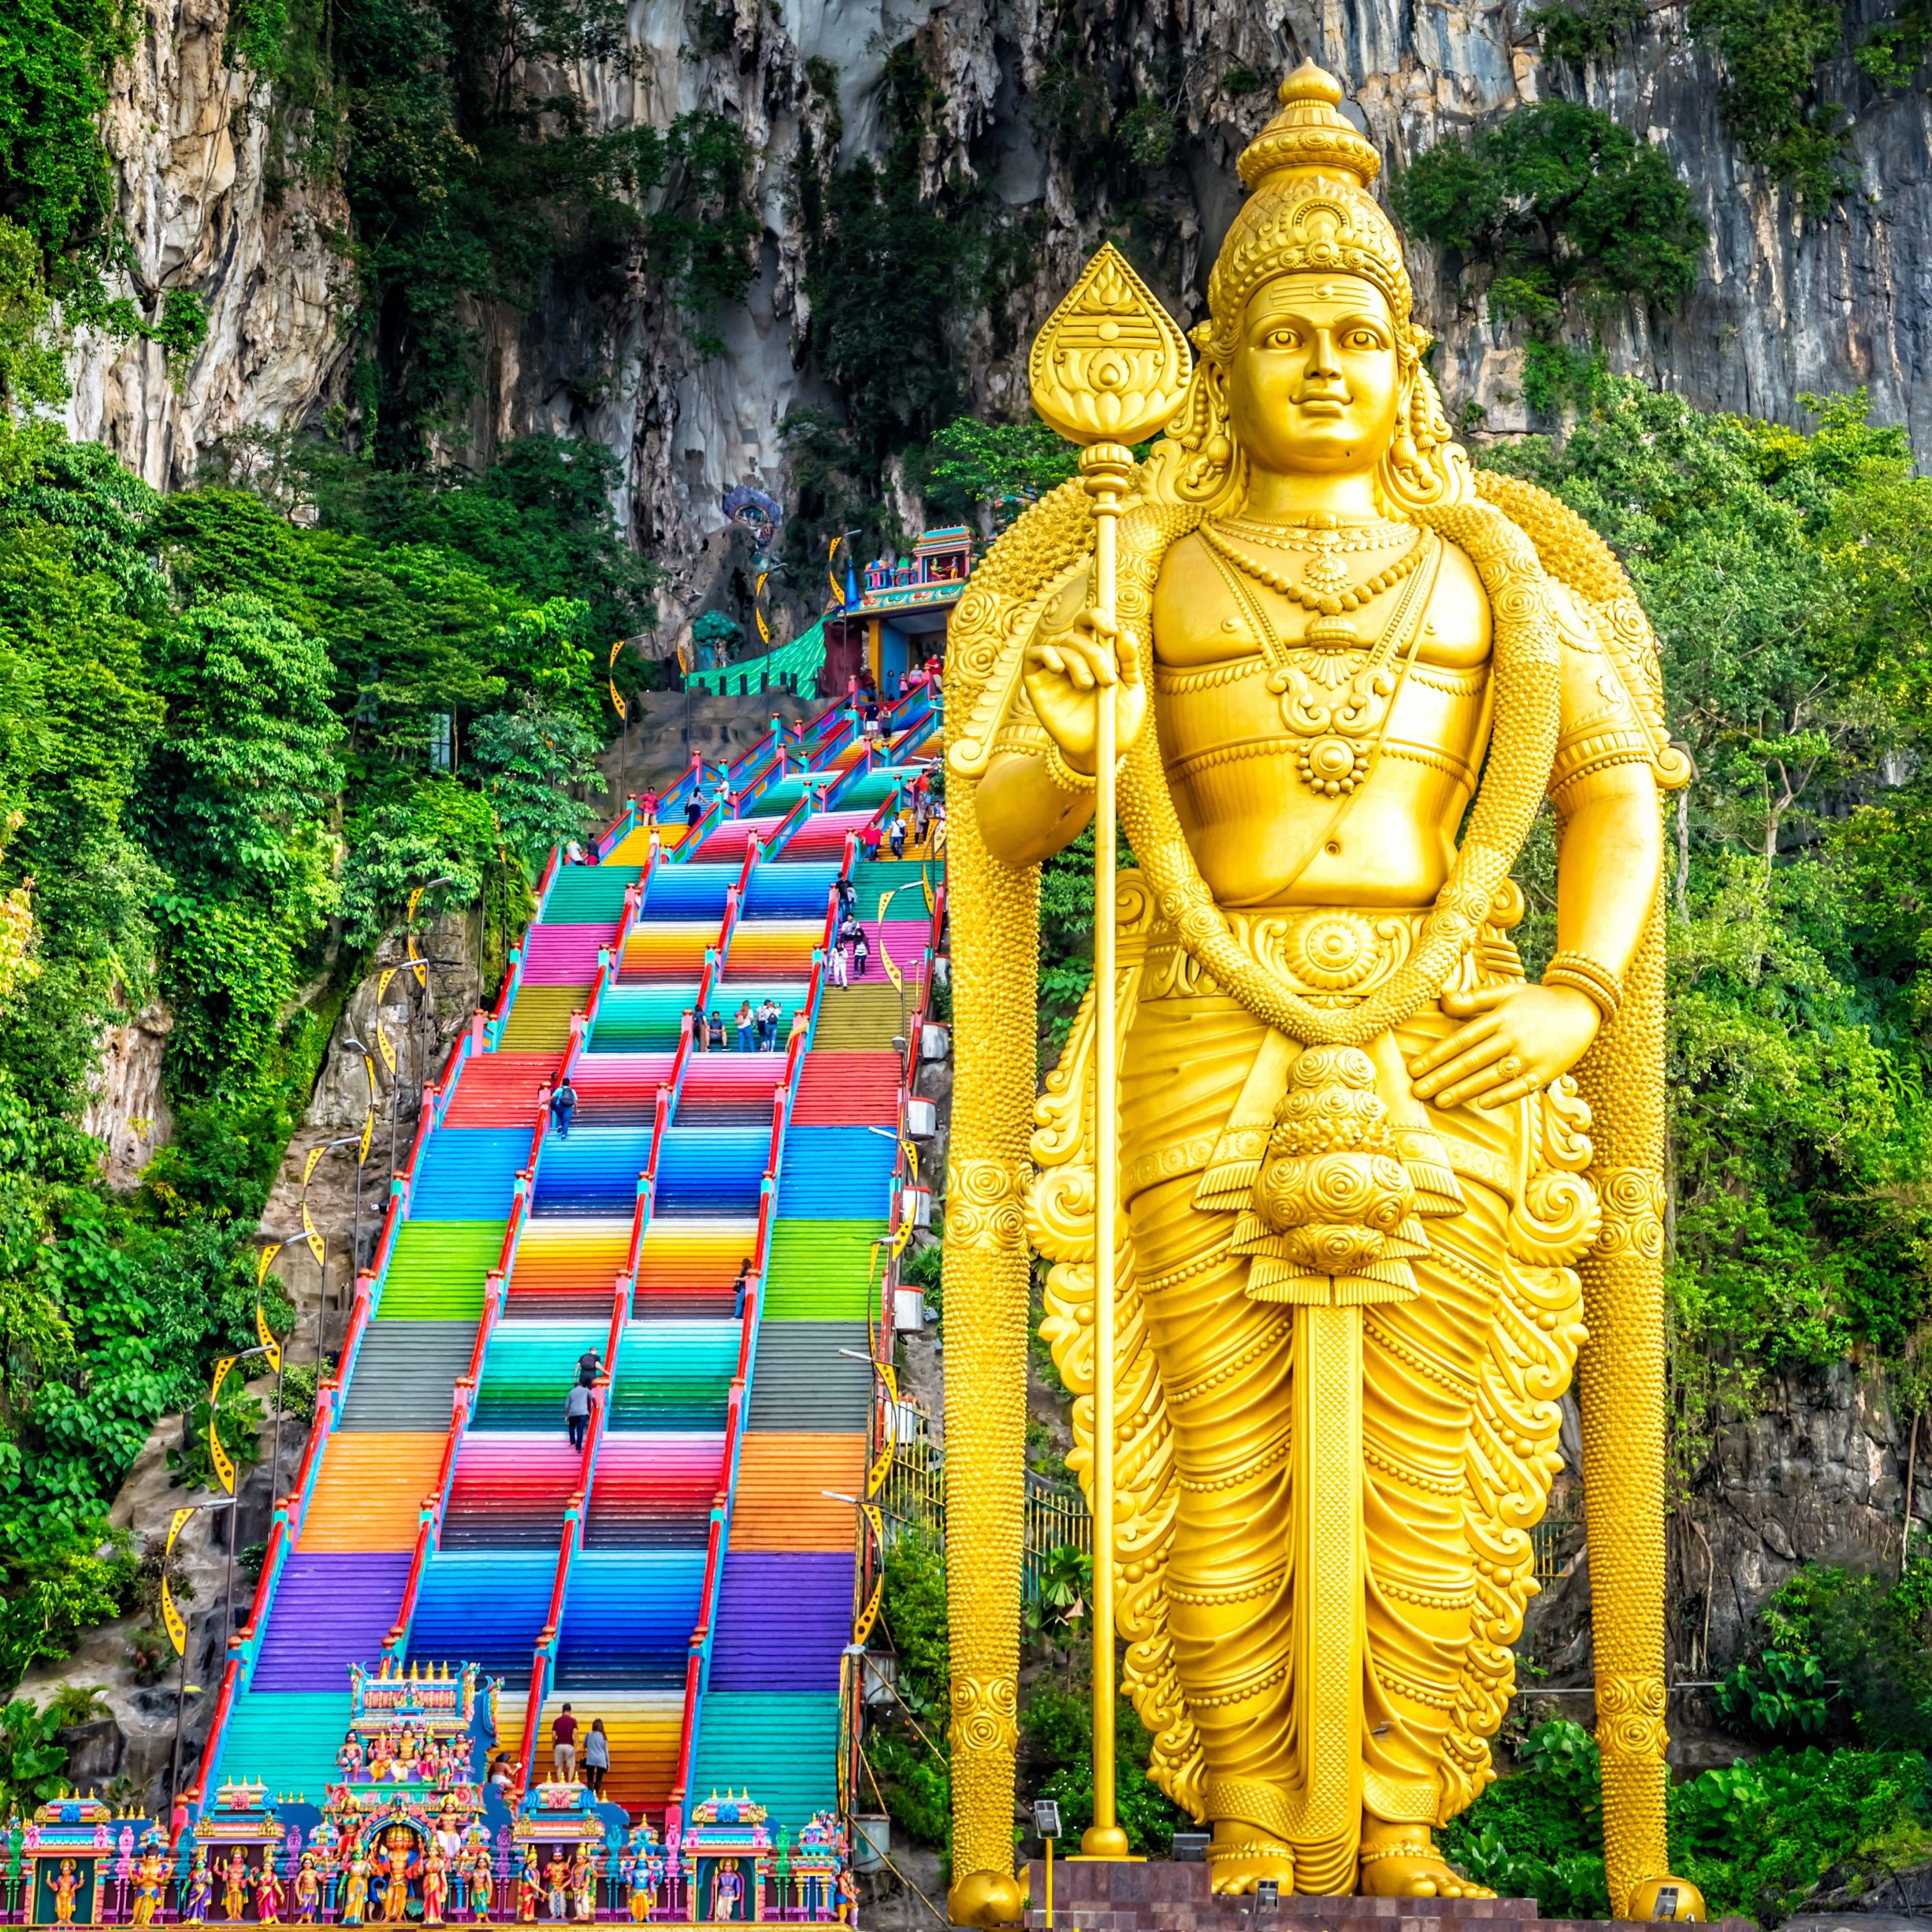 Day 2: Batu Caves and Countryside Tour